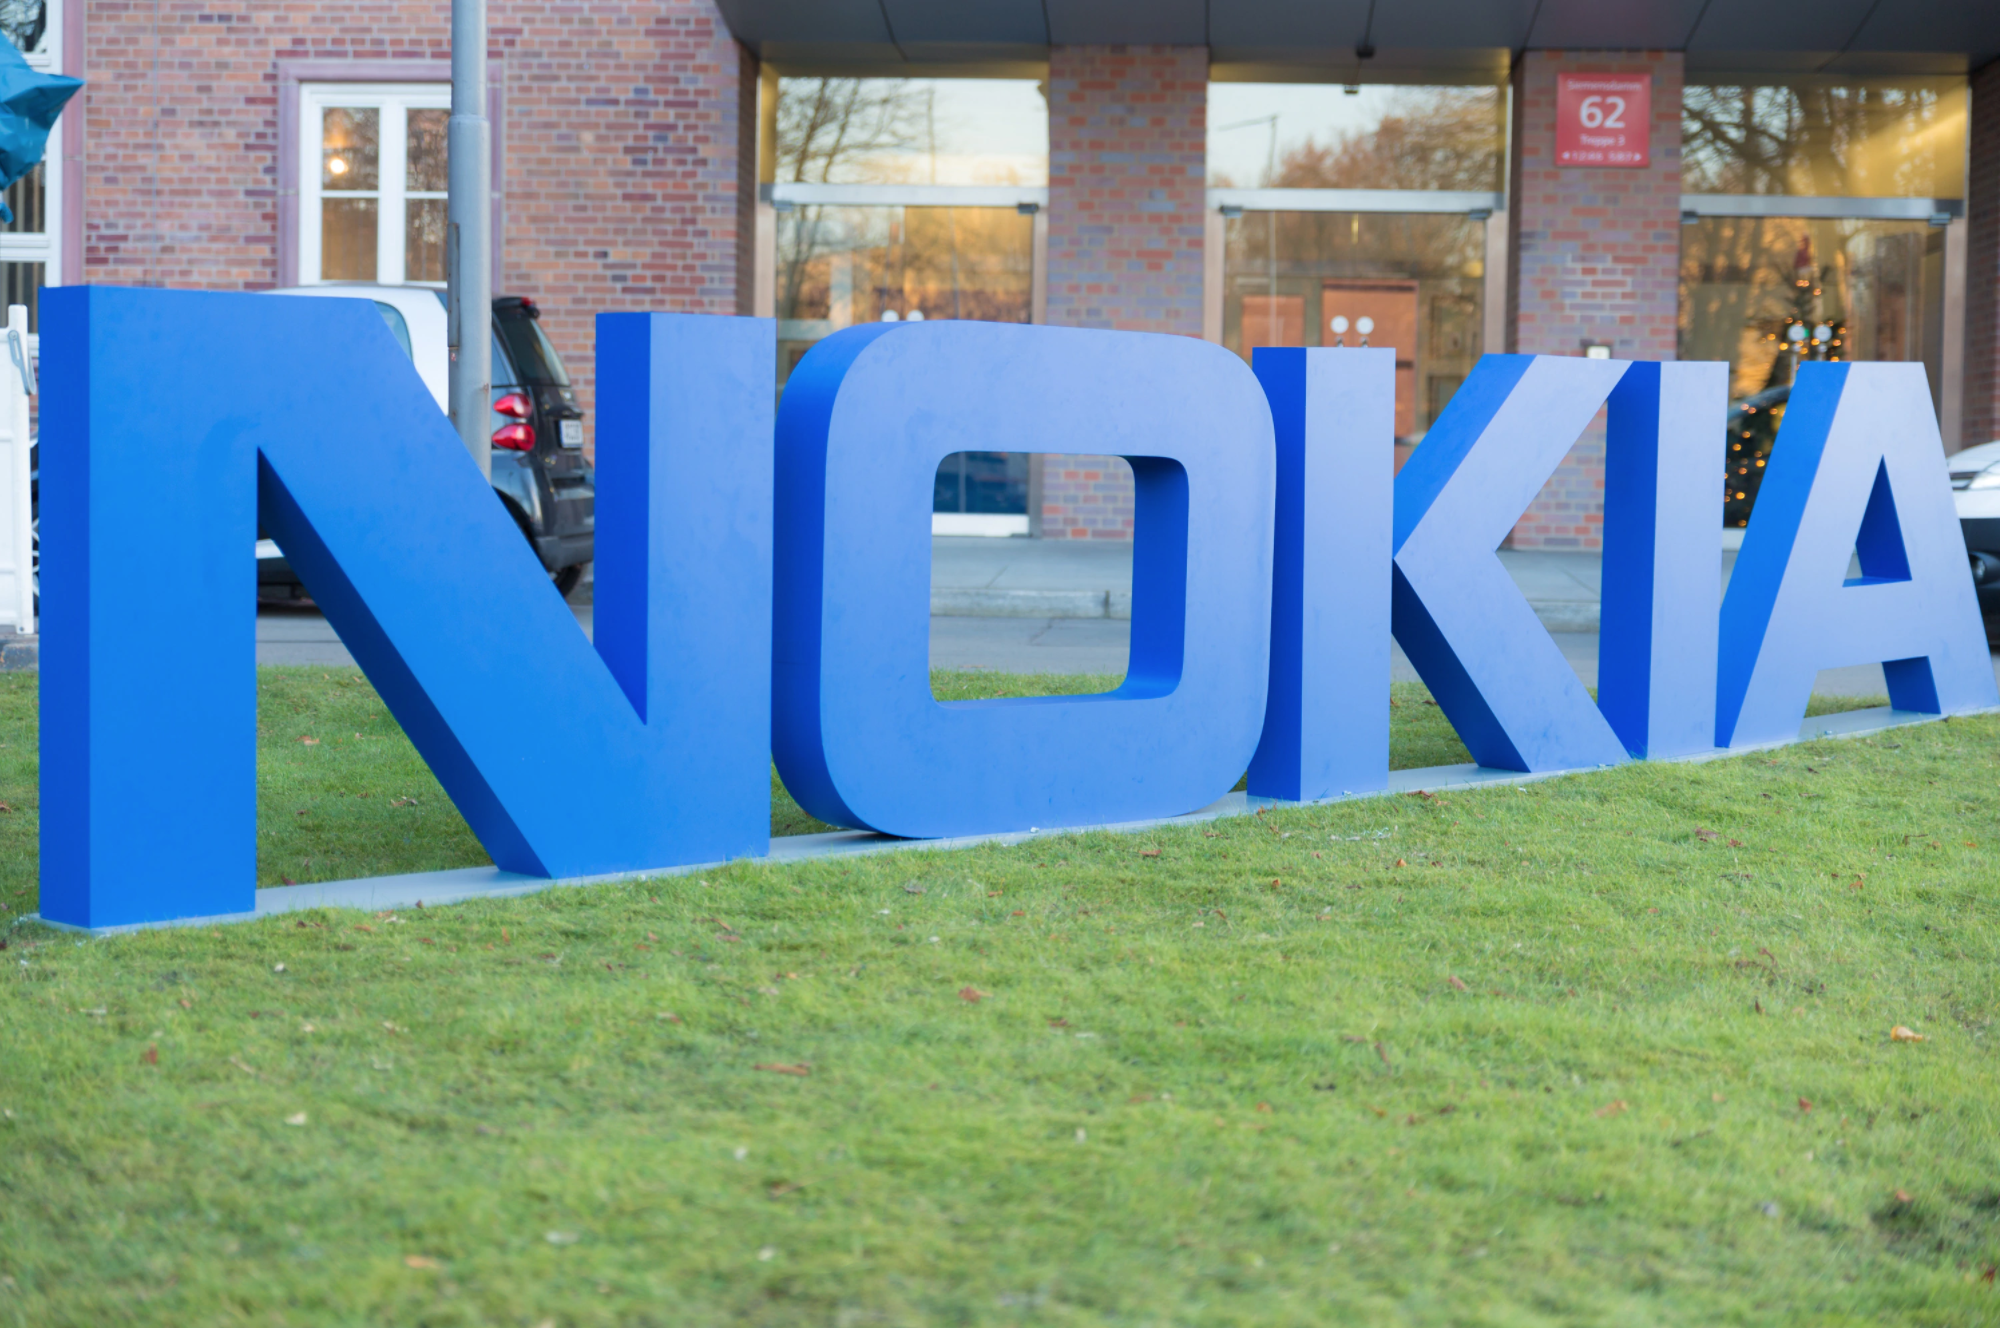 Image sourced from Nokia website